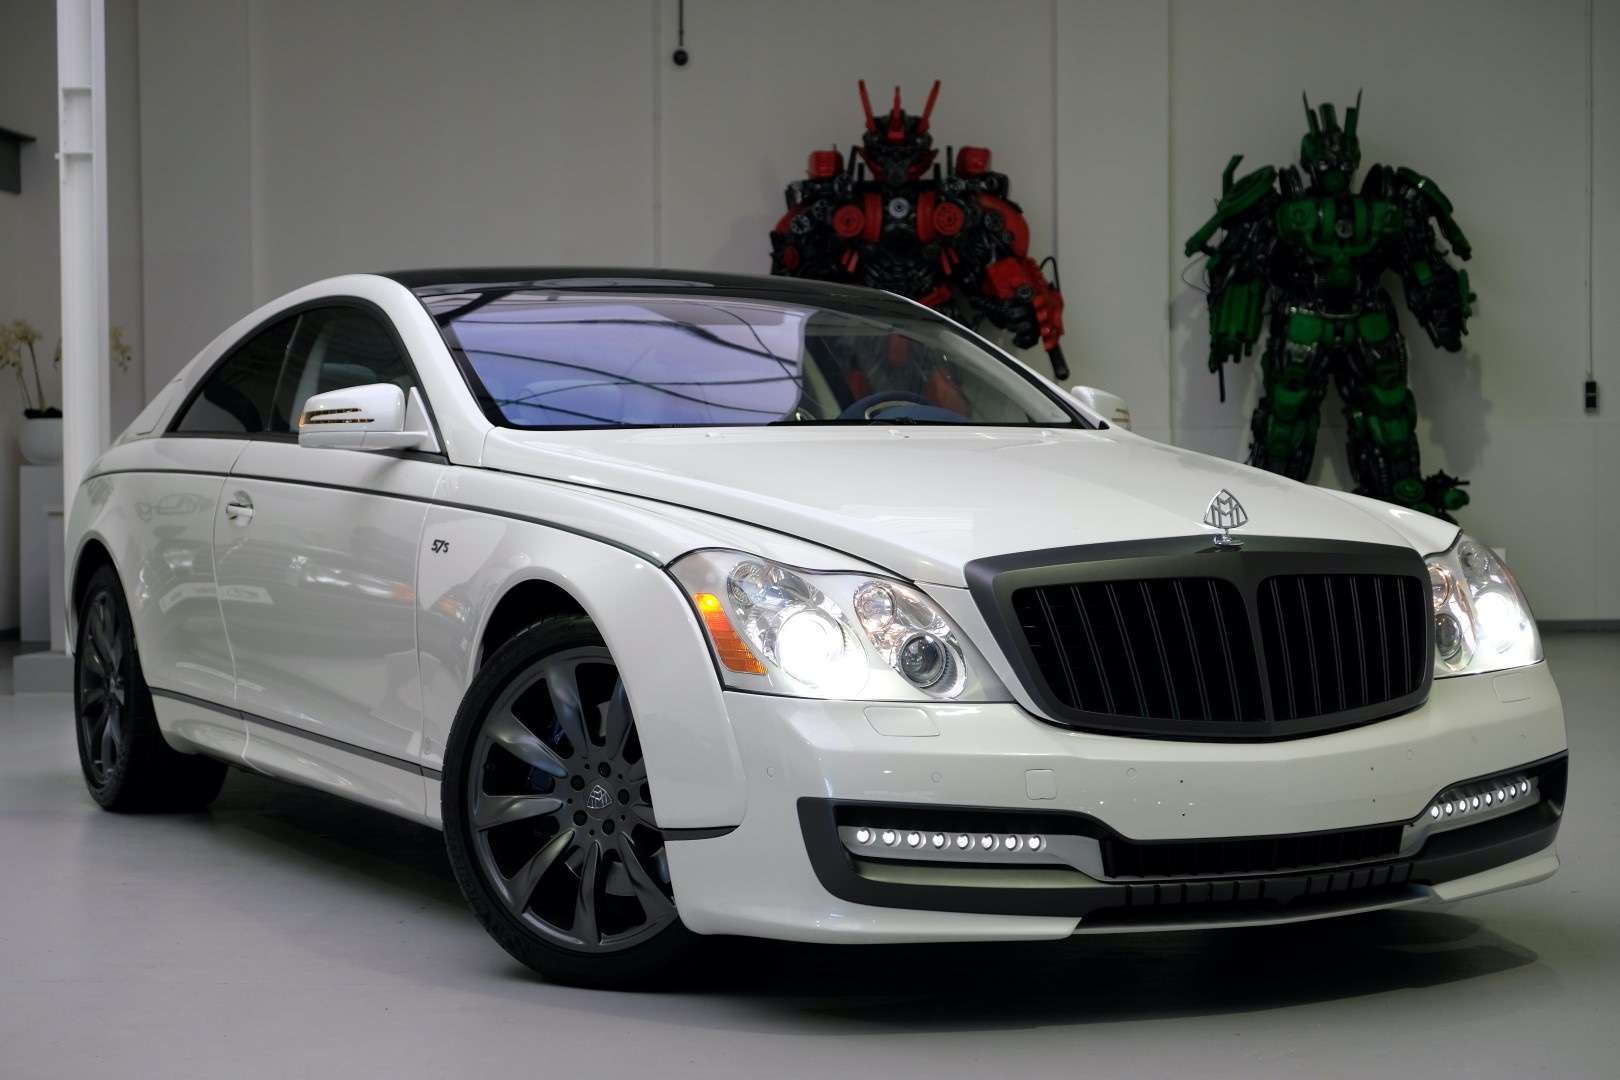 Maybach 57 Coupe in White used in ALKMAAR for € 799,500.-